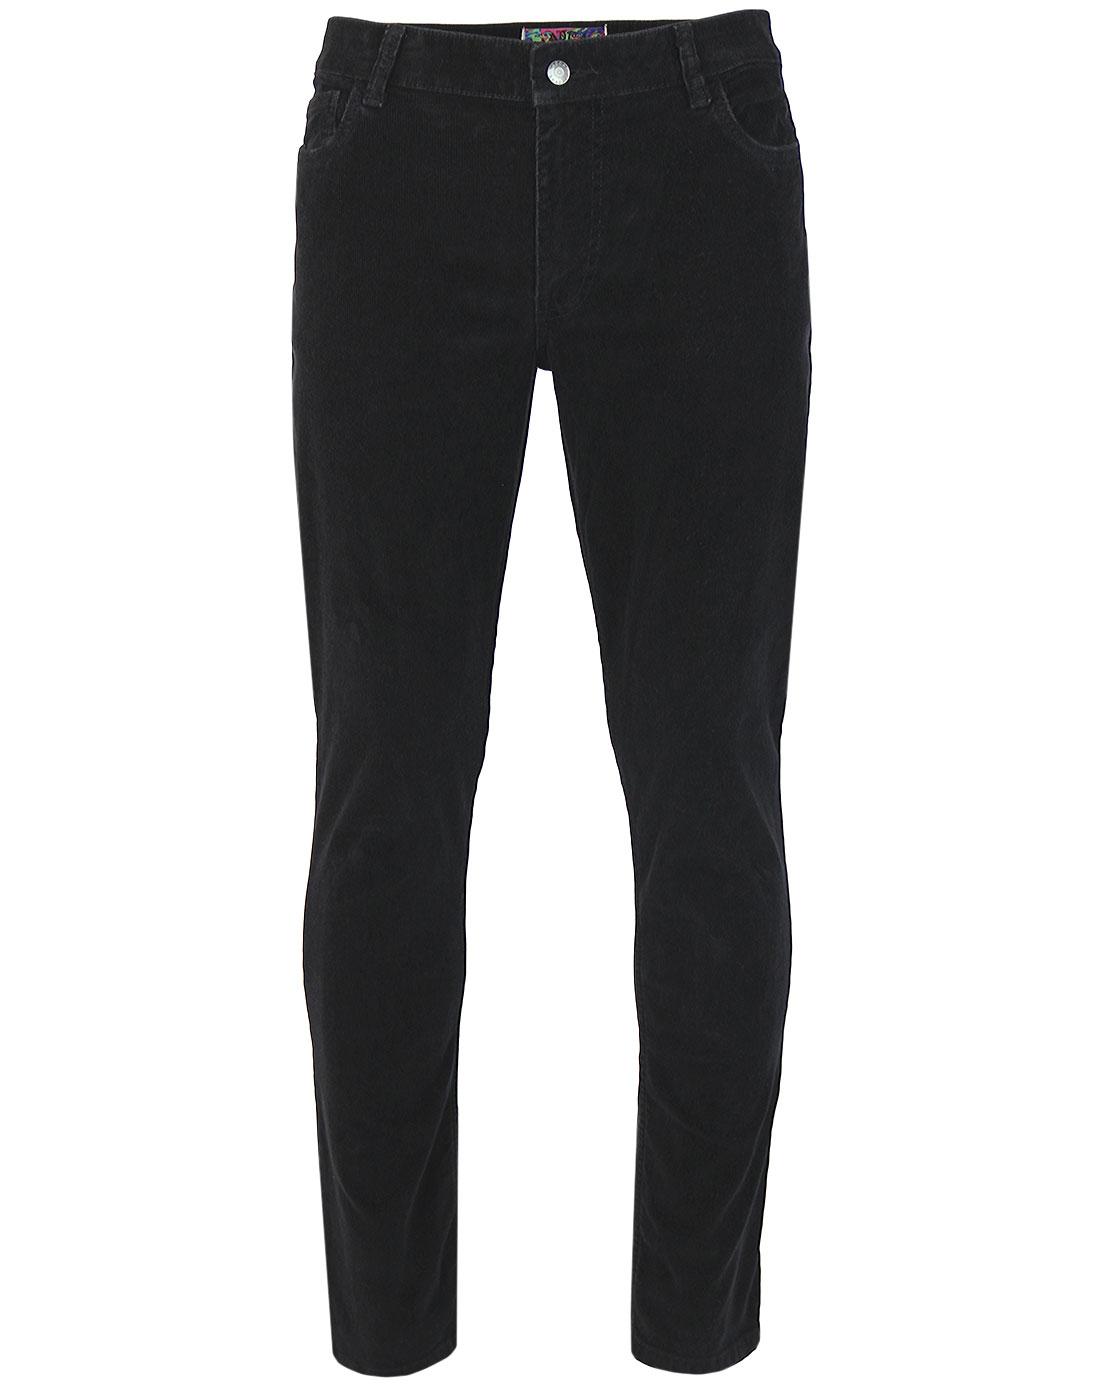 MADCAP ENGLAND Jarvis Mod Needle Cord Drainpipe Trousers in Black